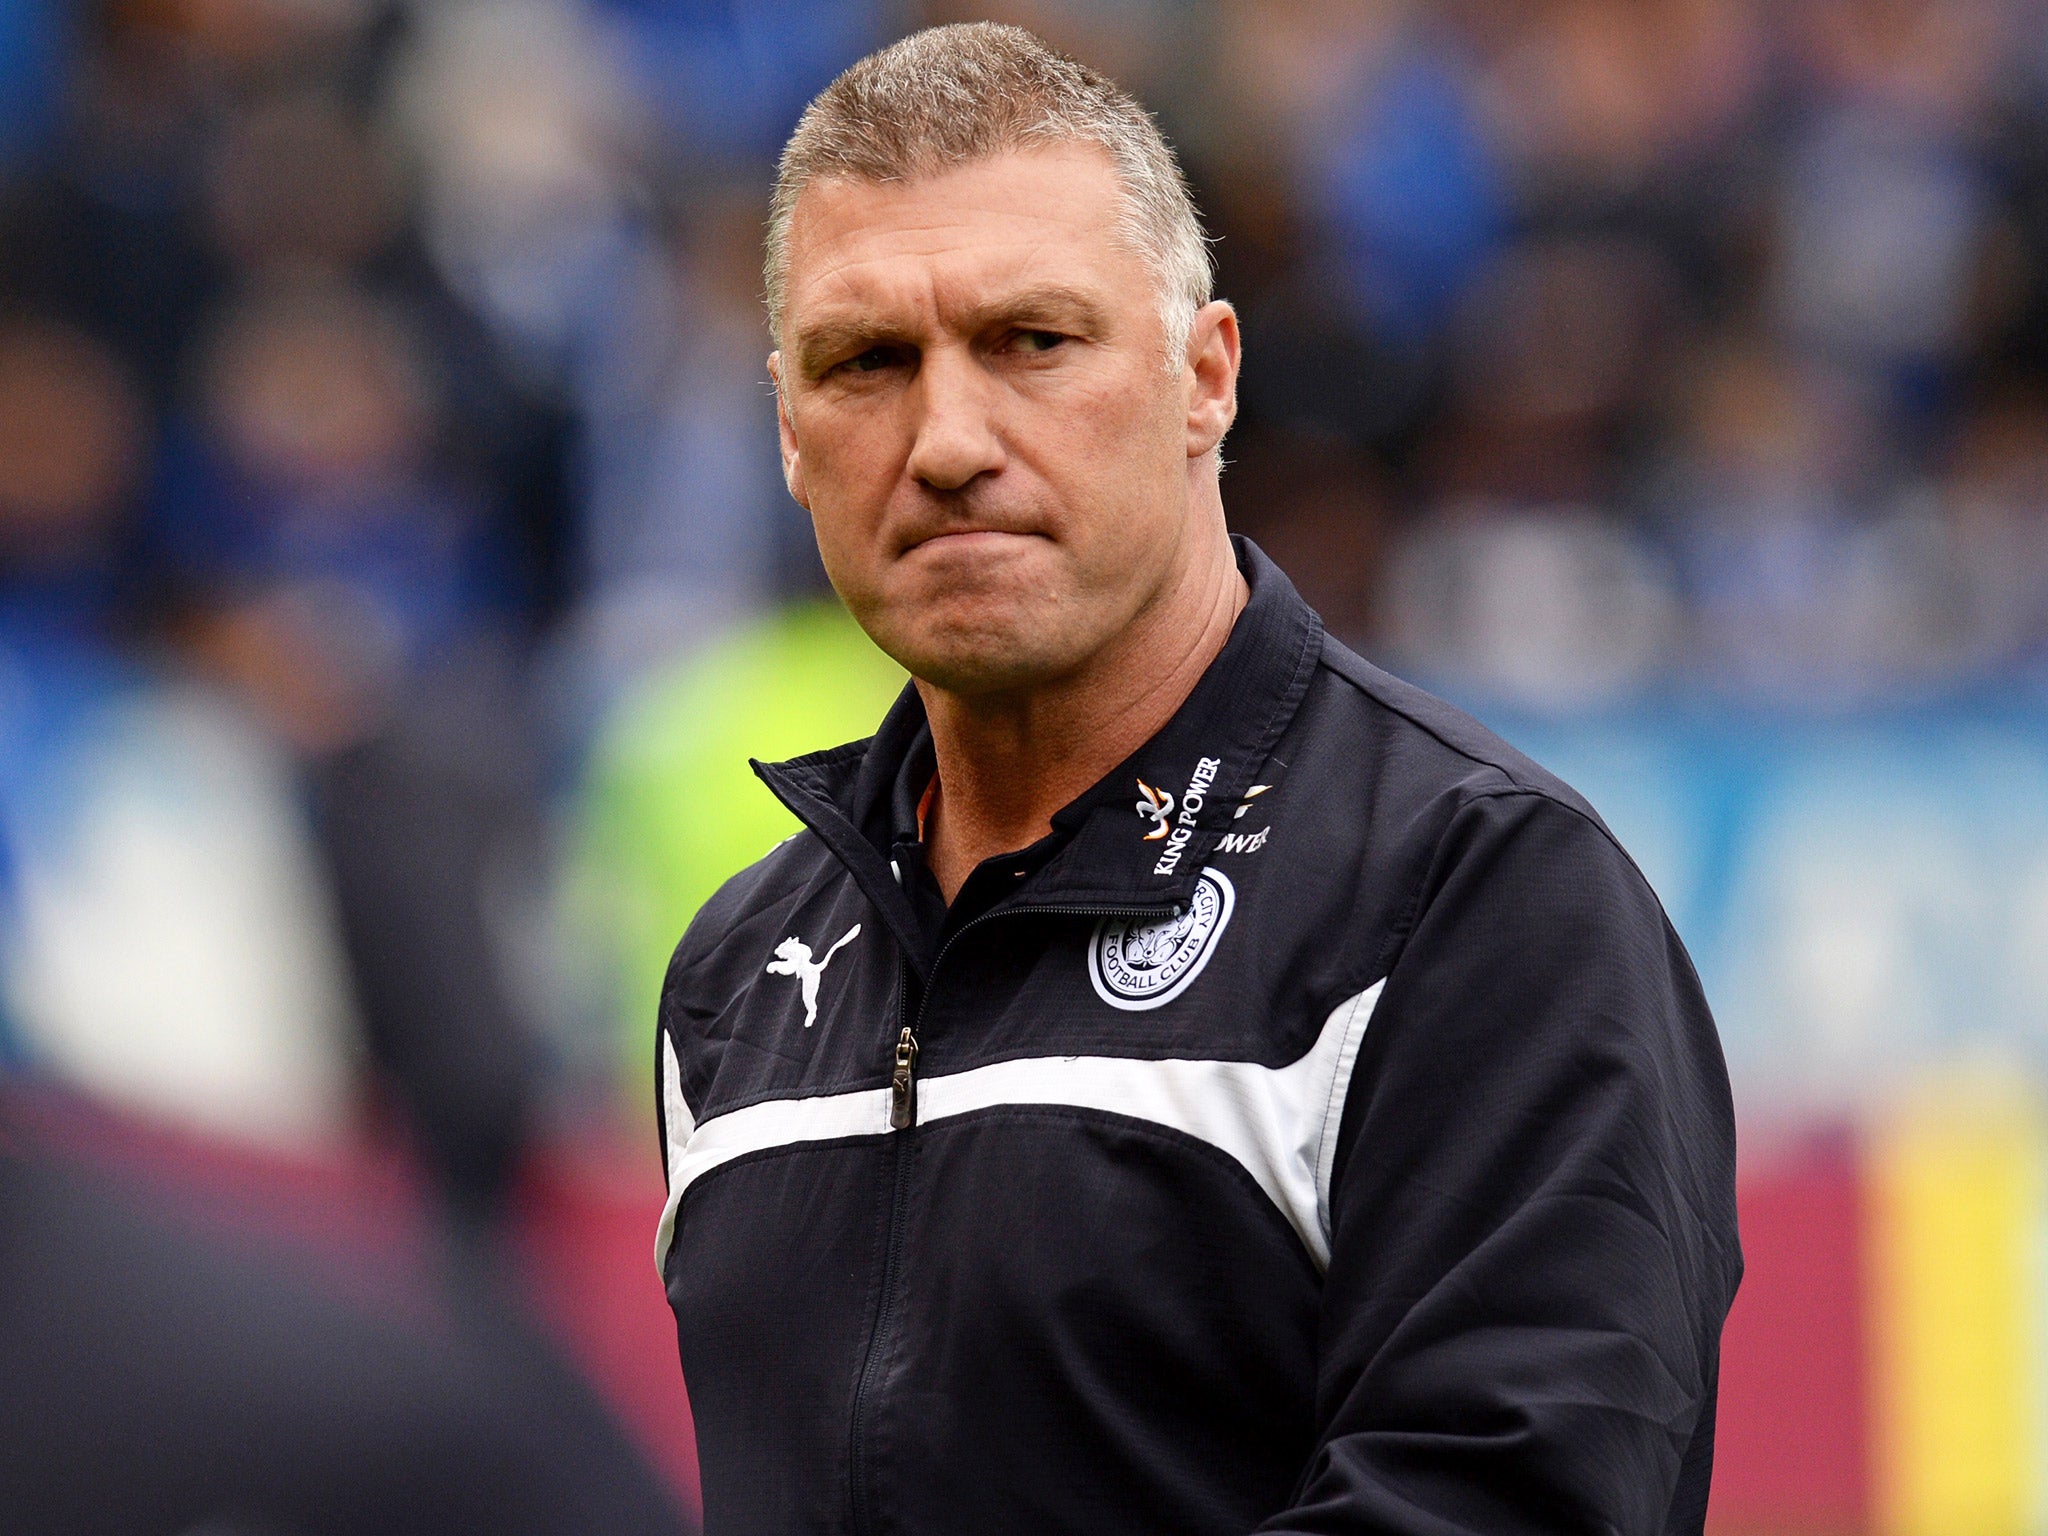 Nigel Pearson beat the odds to keep Leicester City in the Premier League last season